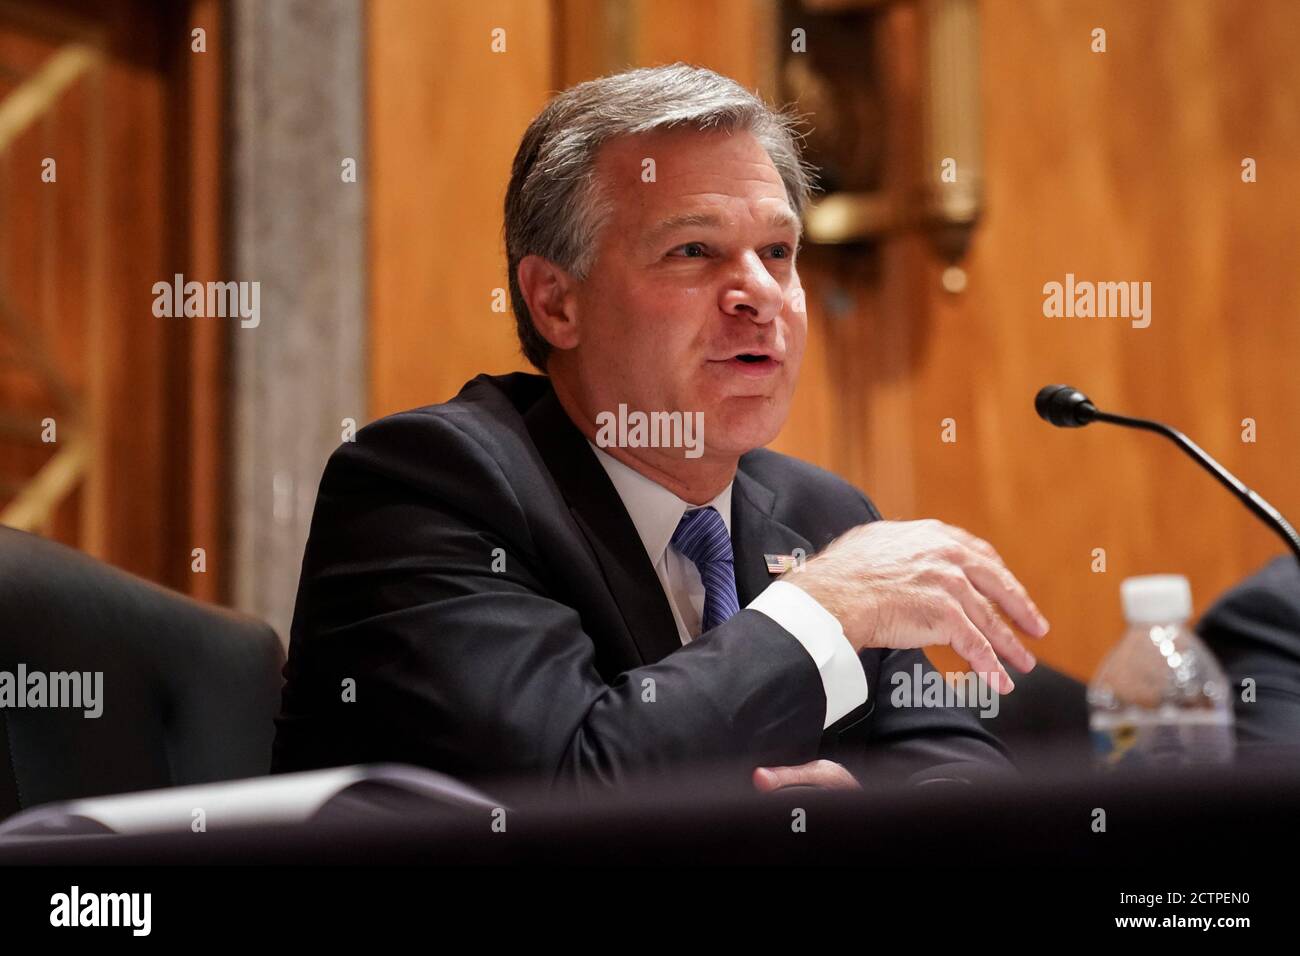 Washington, United States. 24th Sep, 2020. FBI Director Christopher Wray testifies at a Senate Homeland Security and Governmental Affairs Committee hearing on 'Threats to the Homeland' on Capitol Hill in Washington, DC on Thursday, September 24, 2020. Pool photo by Joshua Roberts/UPI Credit: UPI/Alamy Live News Stock Photo